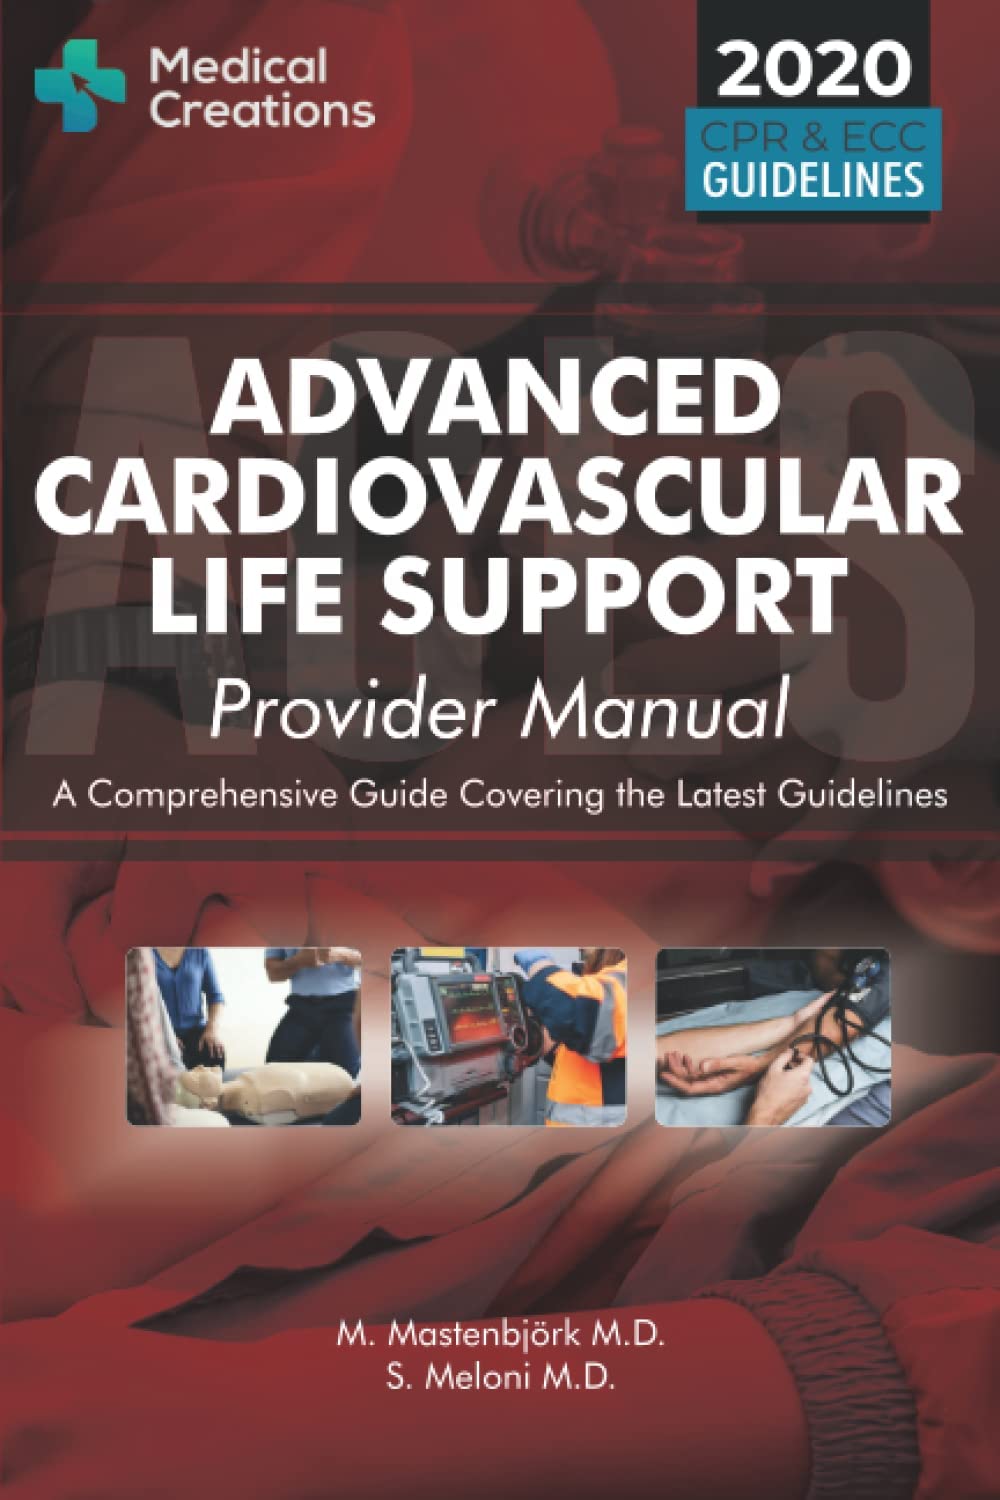 Advanced Cardiovascular Life Support (ACLS) Provider Manual – A Comprehensive Guide Covering the Latest Guidelines